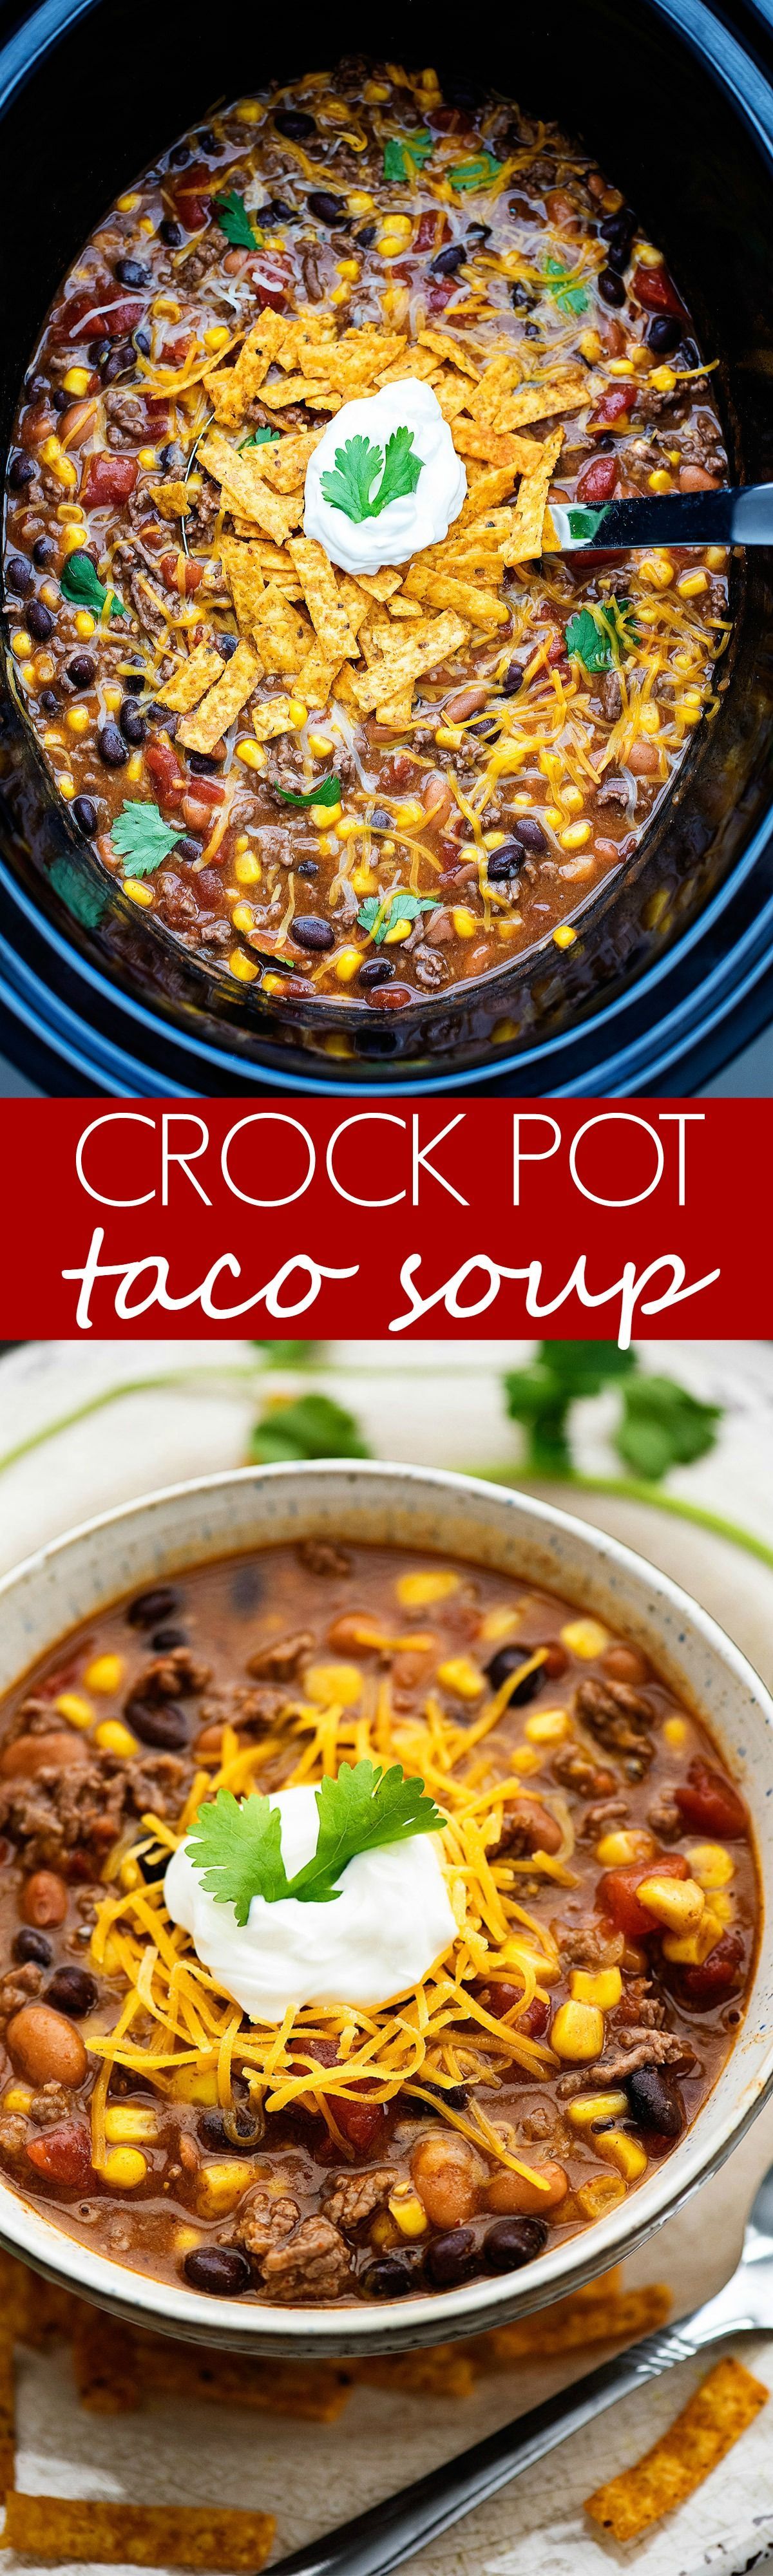 This taco soup could not be any easier to make AND it tastes so delicious!